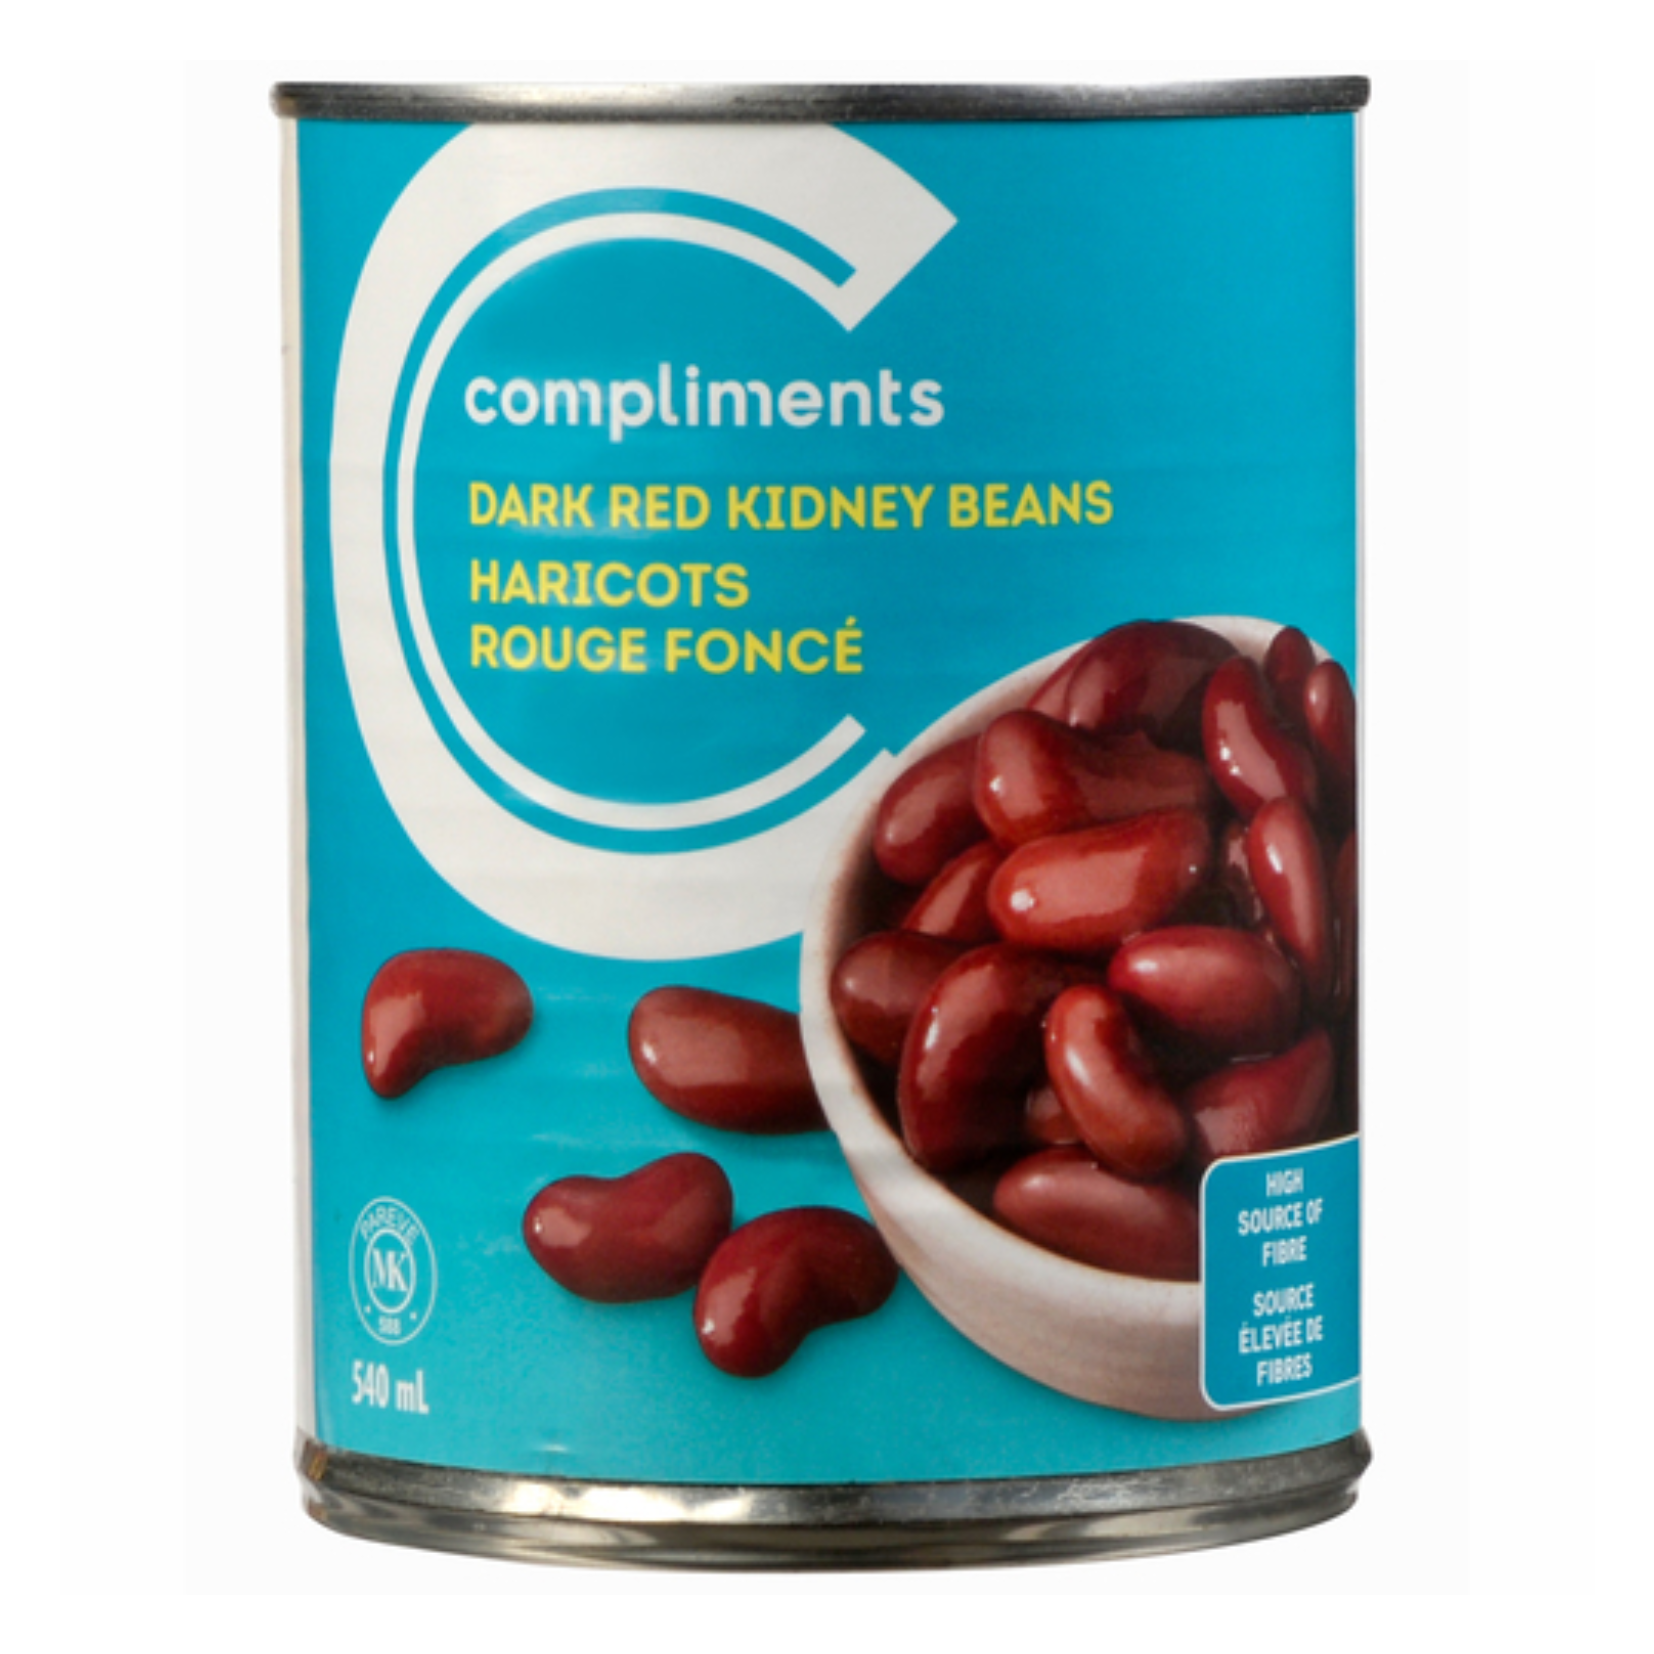 Compliments Dark Red Kidney Beans 540ml